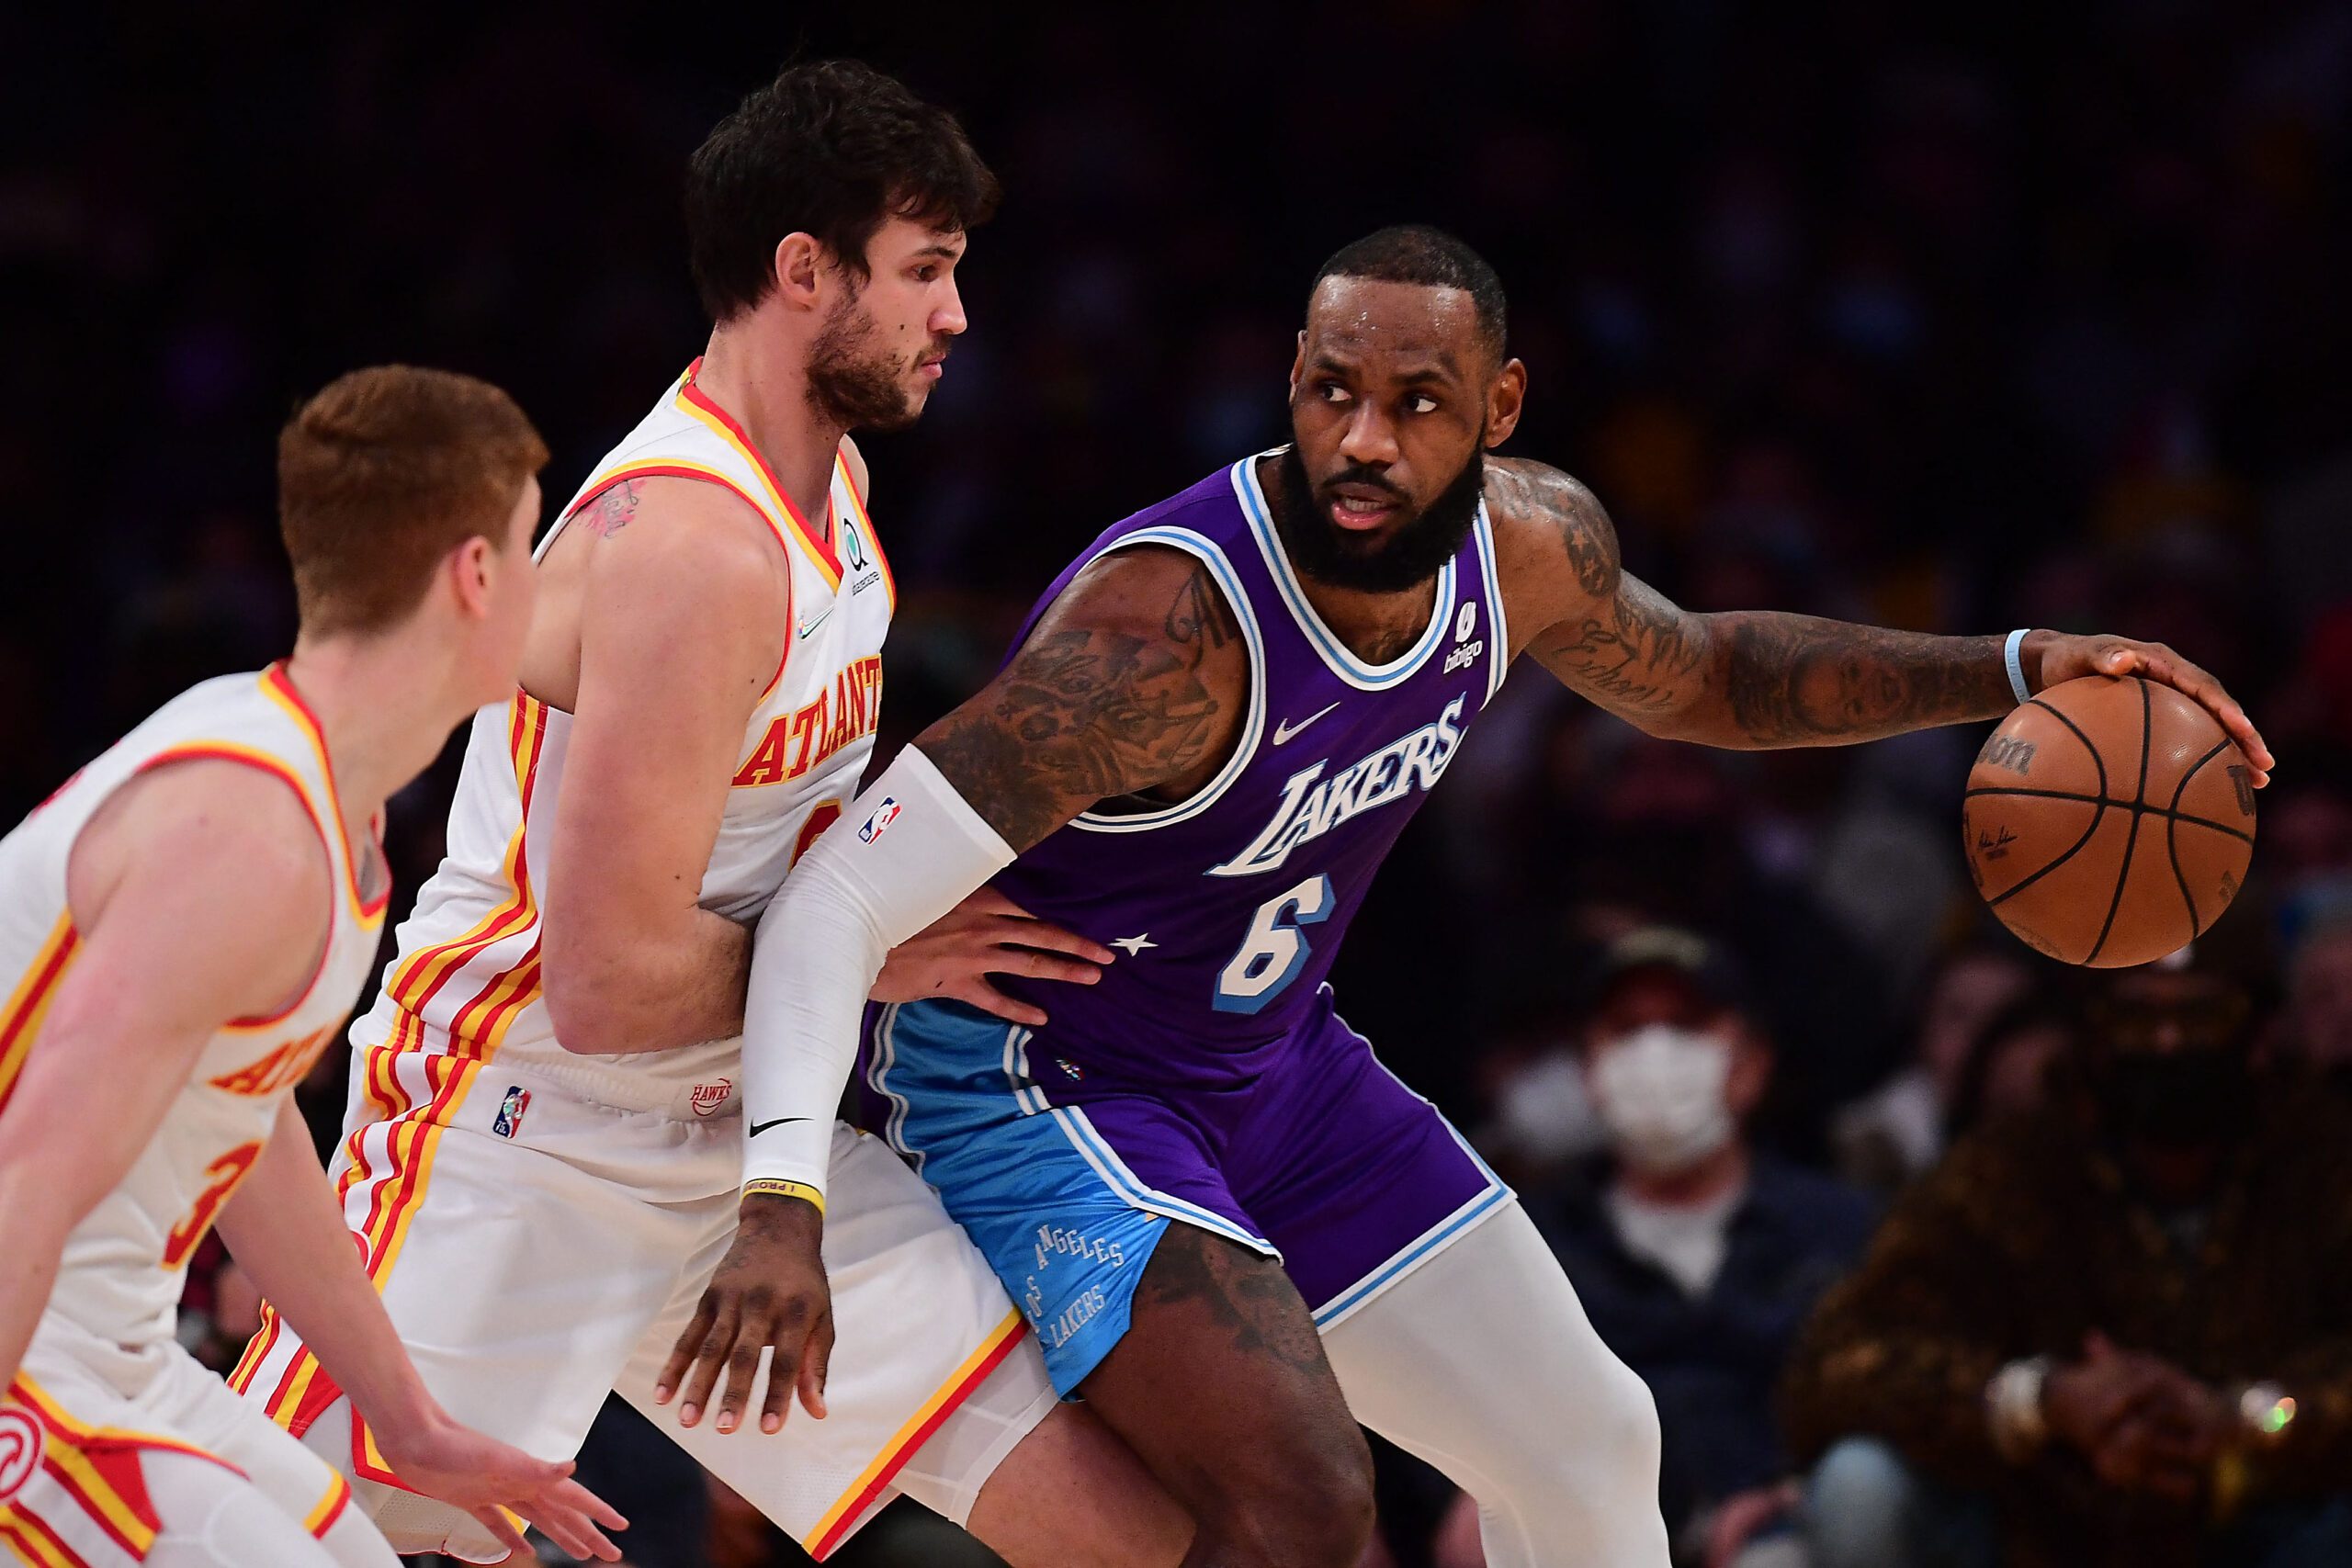 Lakers Vs. Hawks Preview: Road Trip Continues On LeBron James